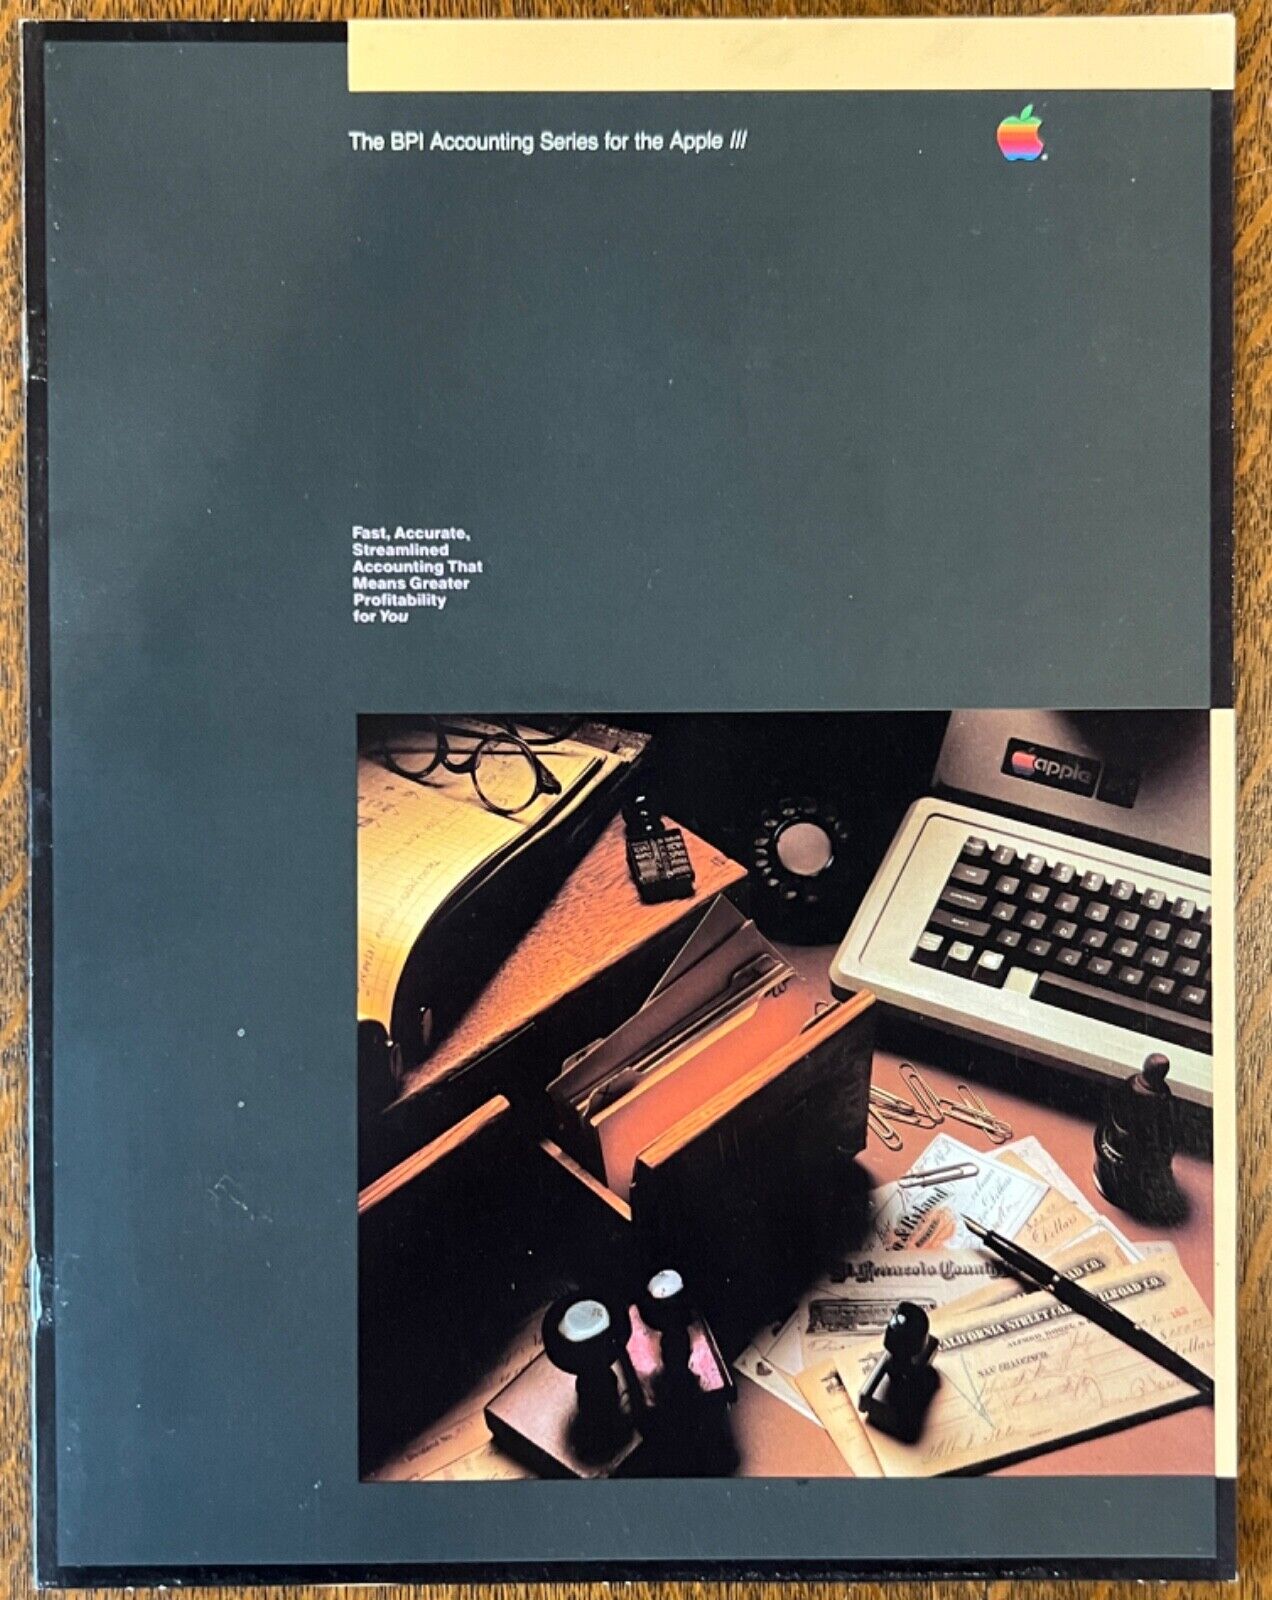 Vintage Apple III Brochure for BPI Accounting Series, very nice condition